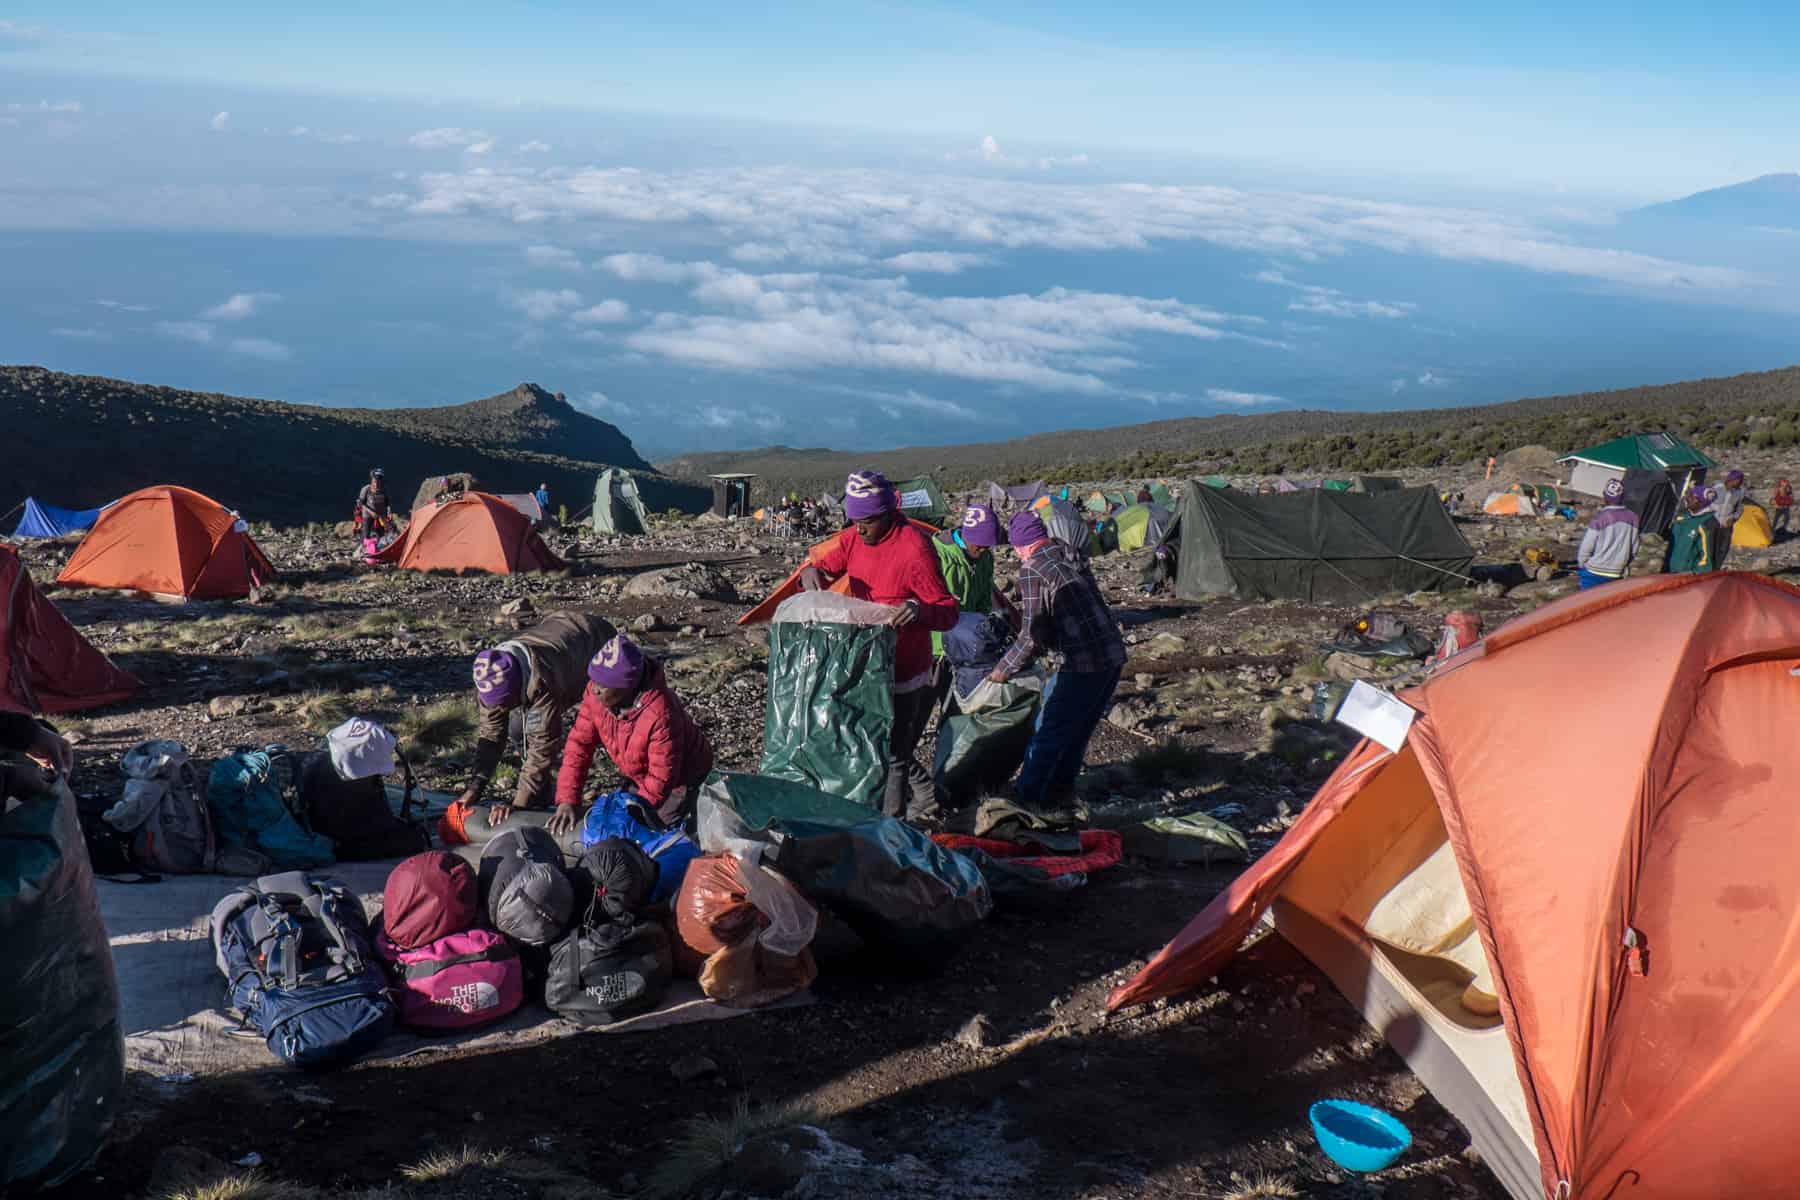 Porters in purple hats at a Kilimanjaro camp with orange and green tents, packing away equipment. 